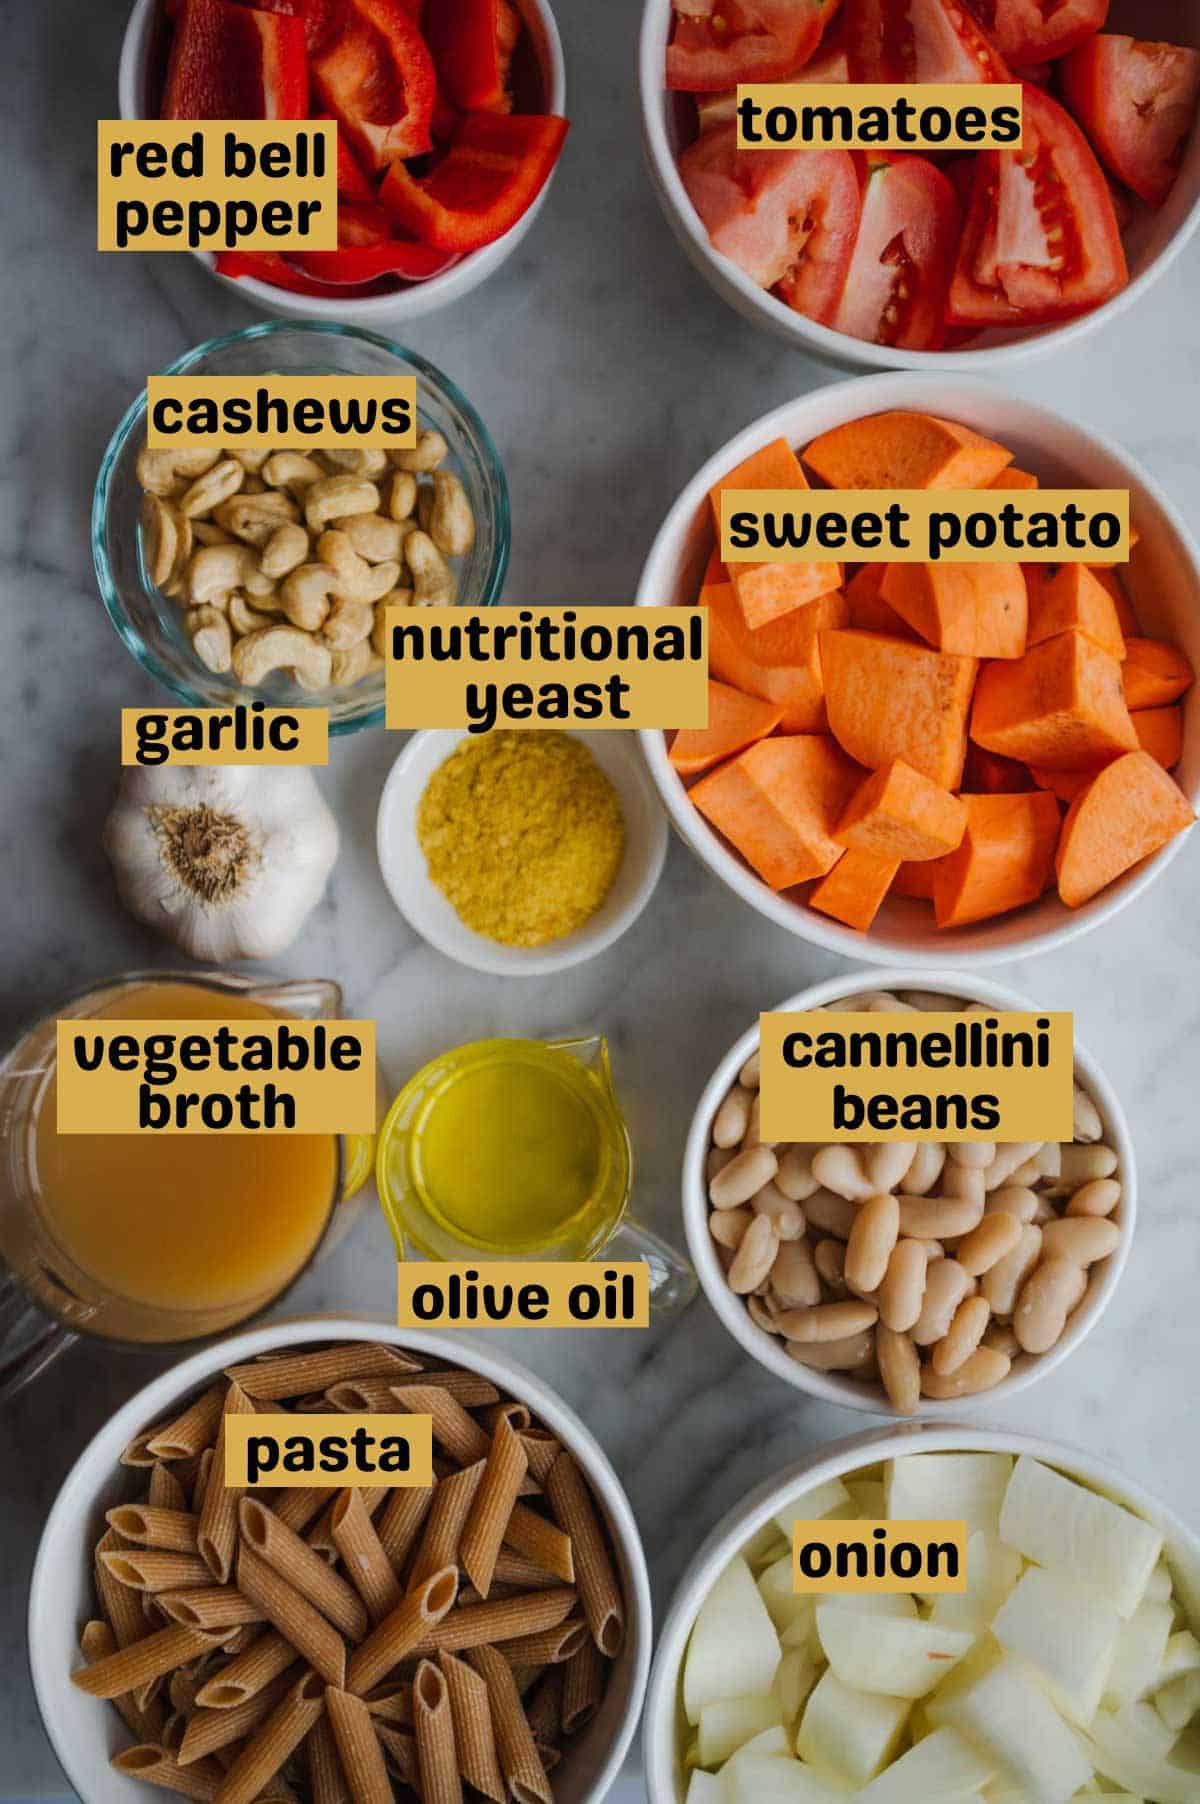 Chopped onion, sweet potato, red bell pepper, tomatoes, penne pasta, cannellini beans, vegetable broth, olive oil, nutritional yeast, garlic bulb, and raw cashews in glass bowls on a white marble board.